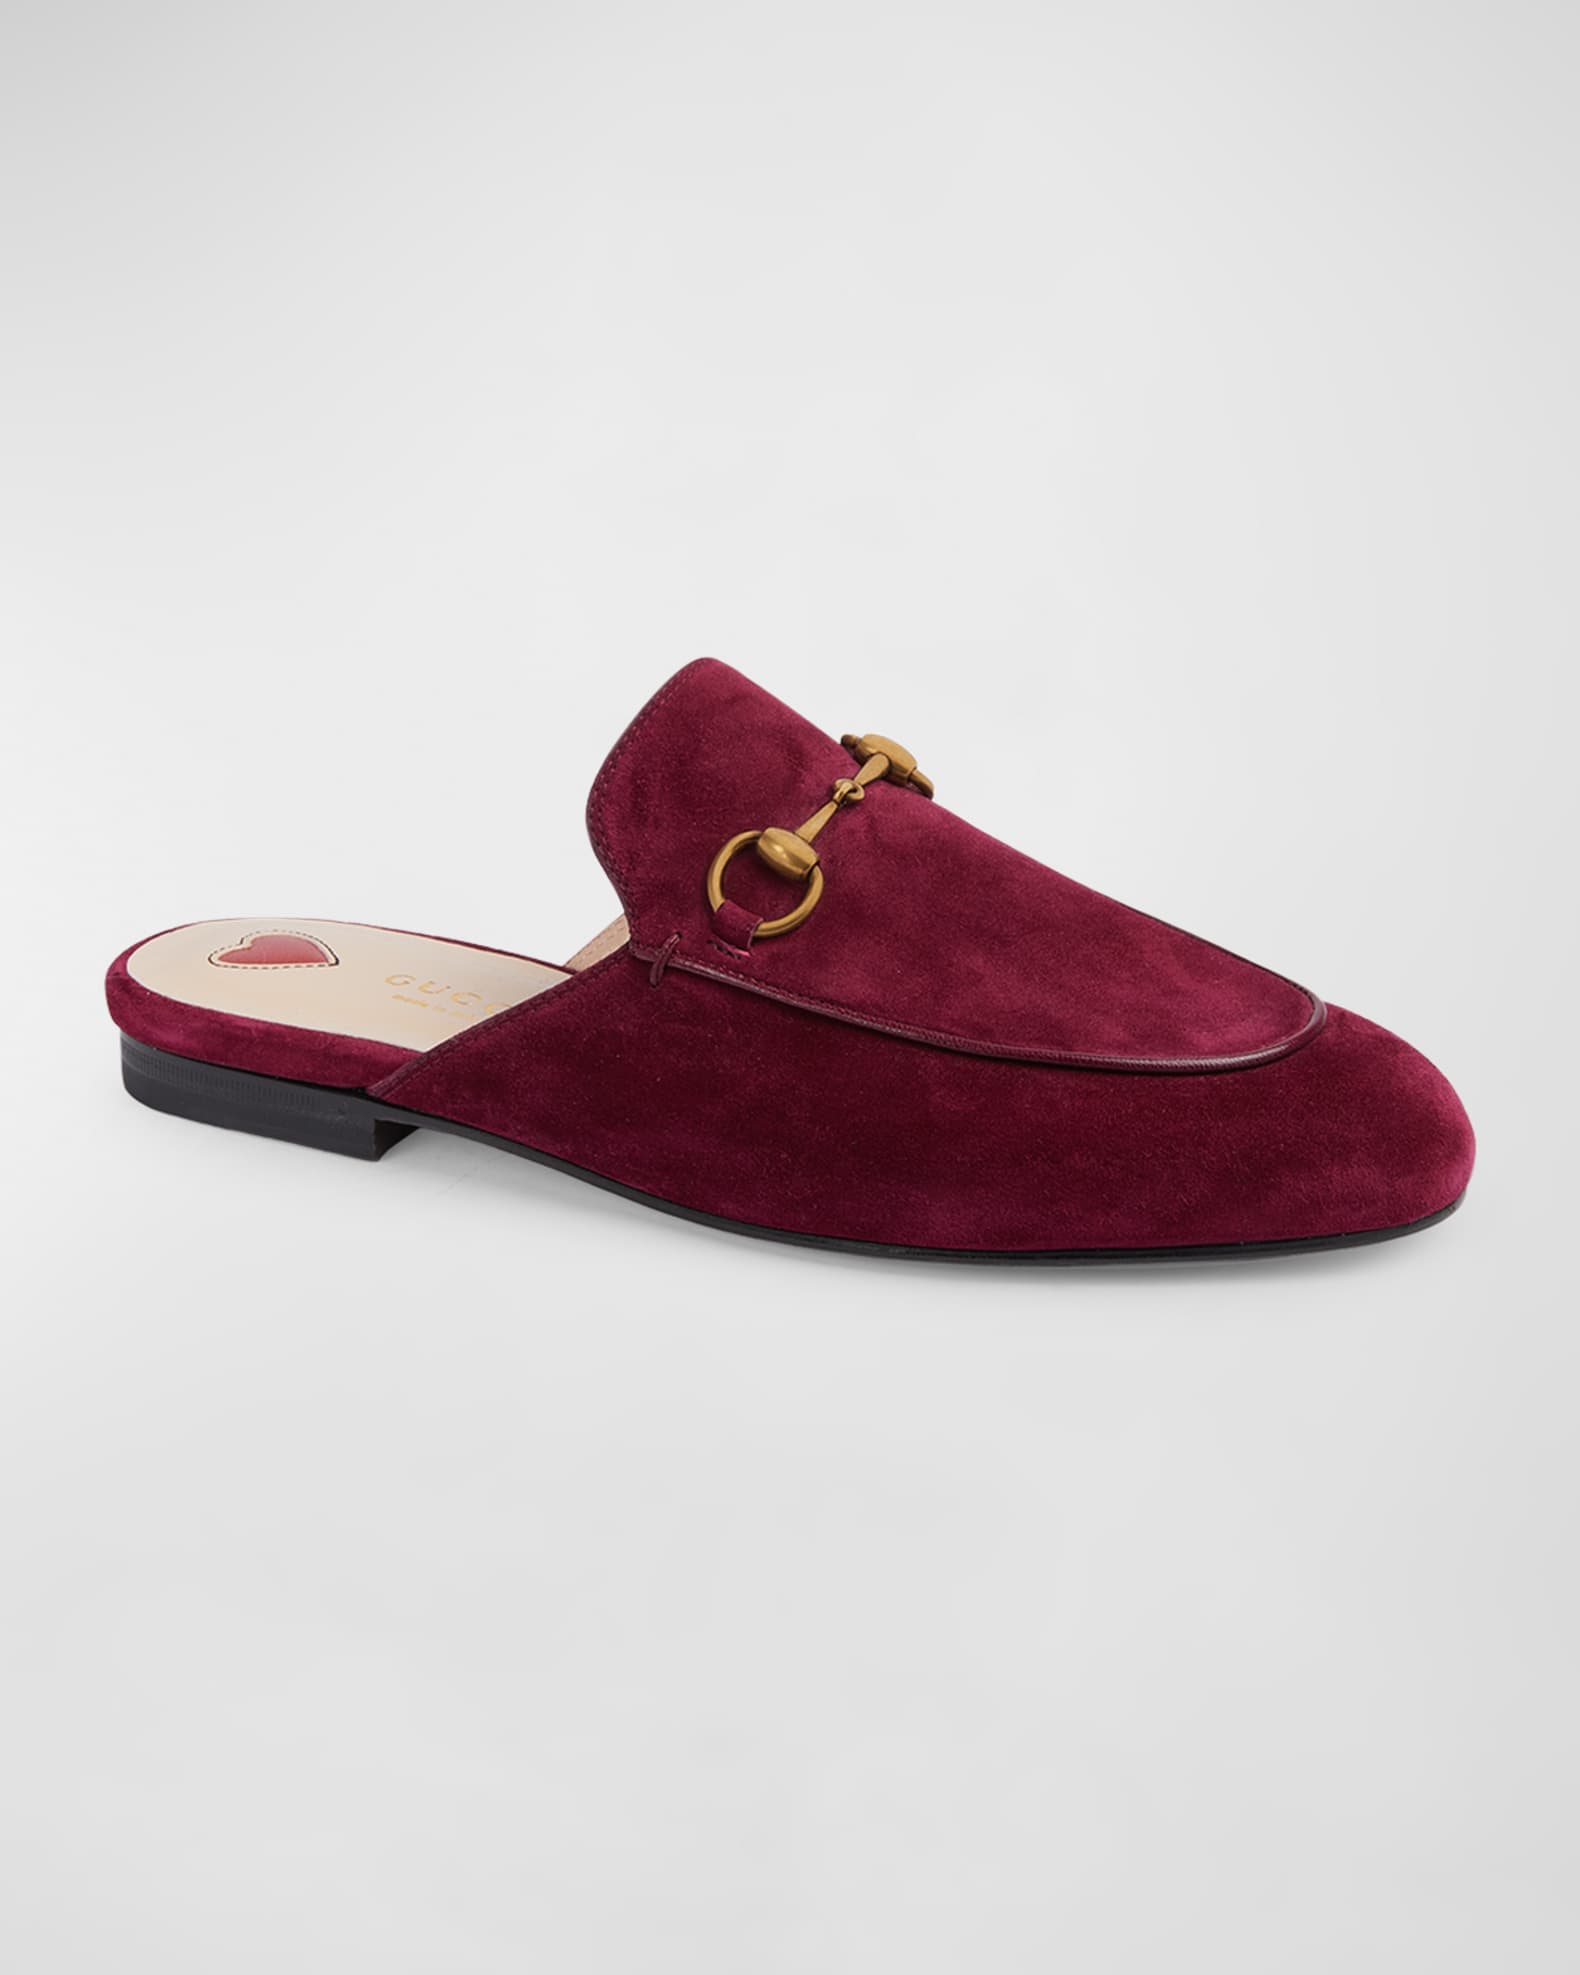 Gucci Princetown Suede Loafer Mules | Neiman Marcus